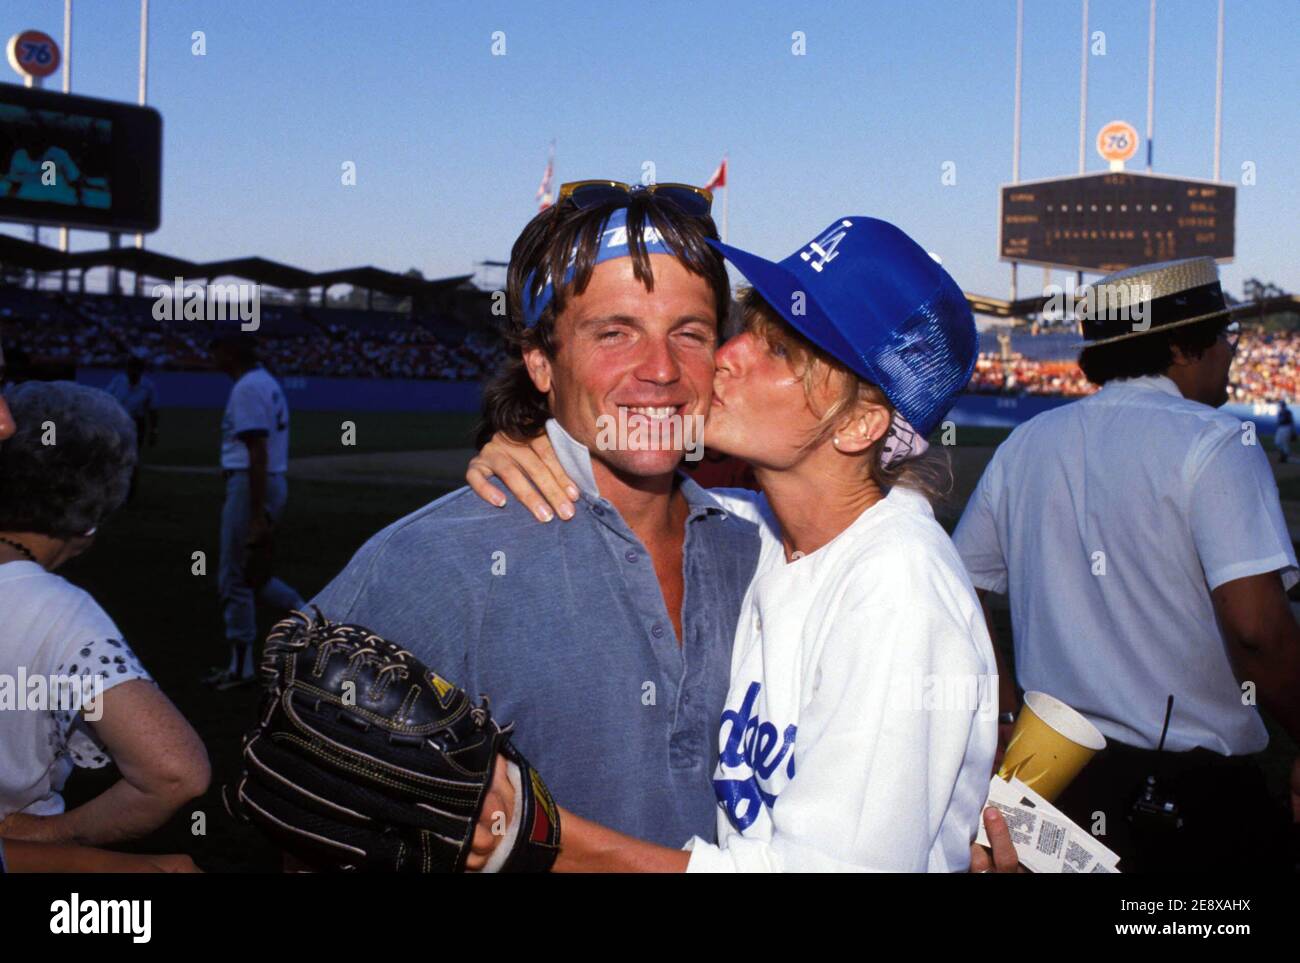 Nicollette Sheridan at the Hollywood All-Stars Baseball Game August 23, 1986.  Credit: Ralph Dominguez/MediaPunch Stock Photo